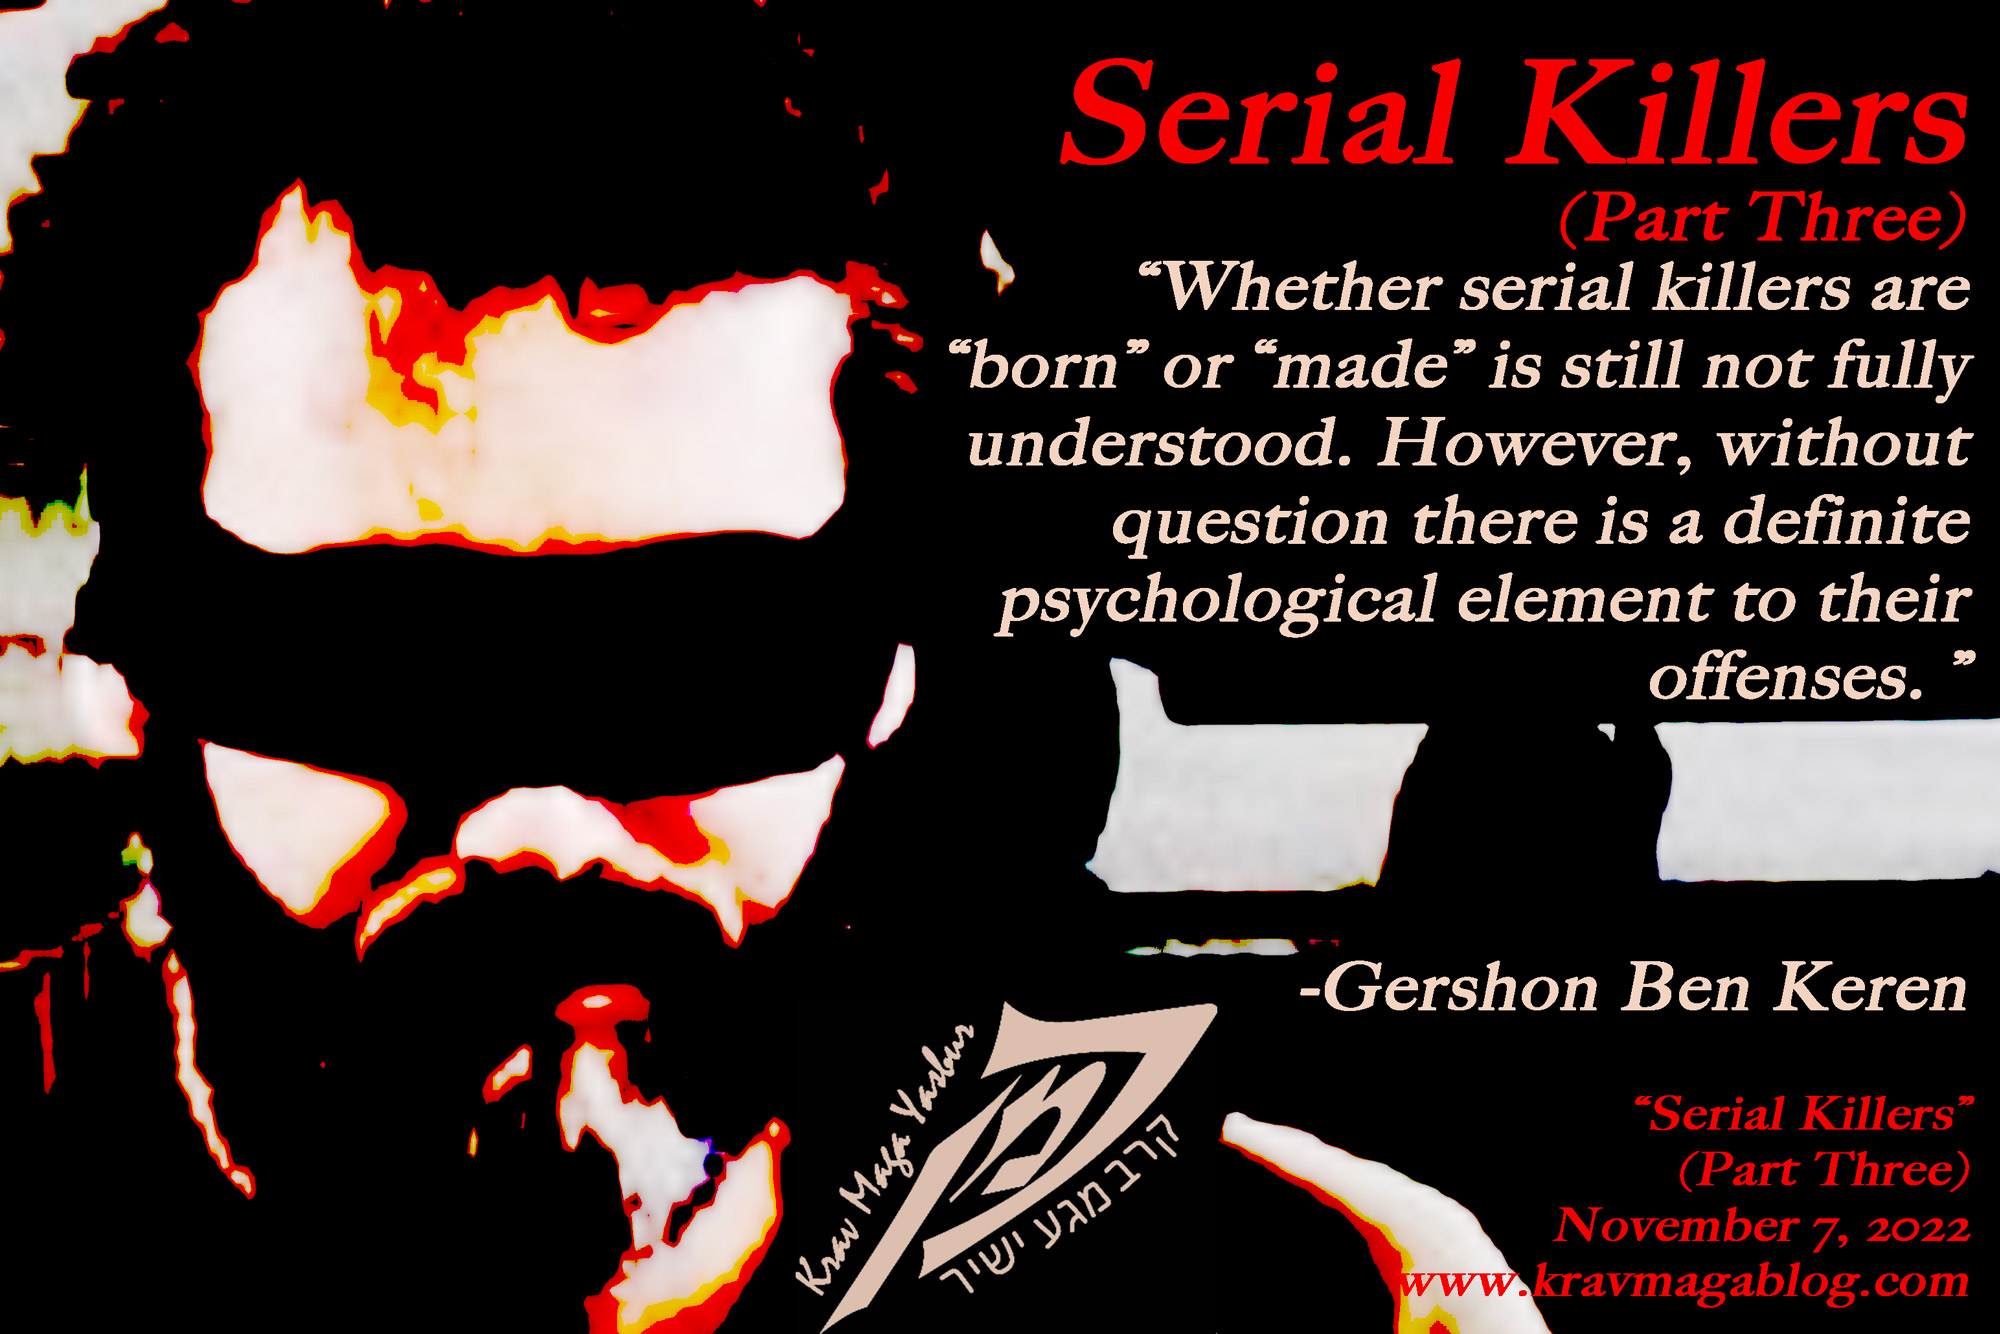 Blog About Serial Killers: A Psychological Perspective